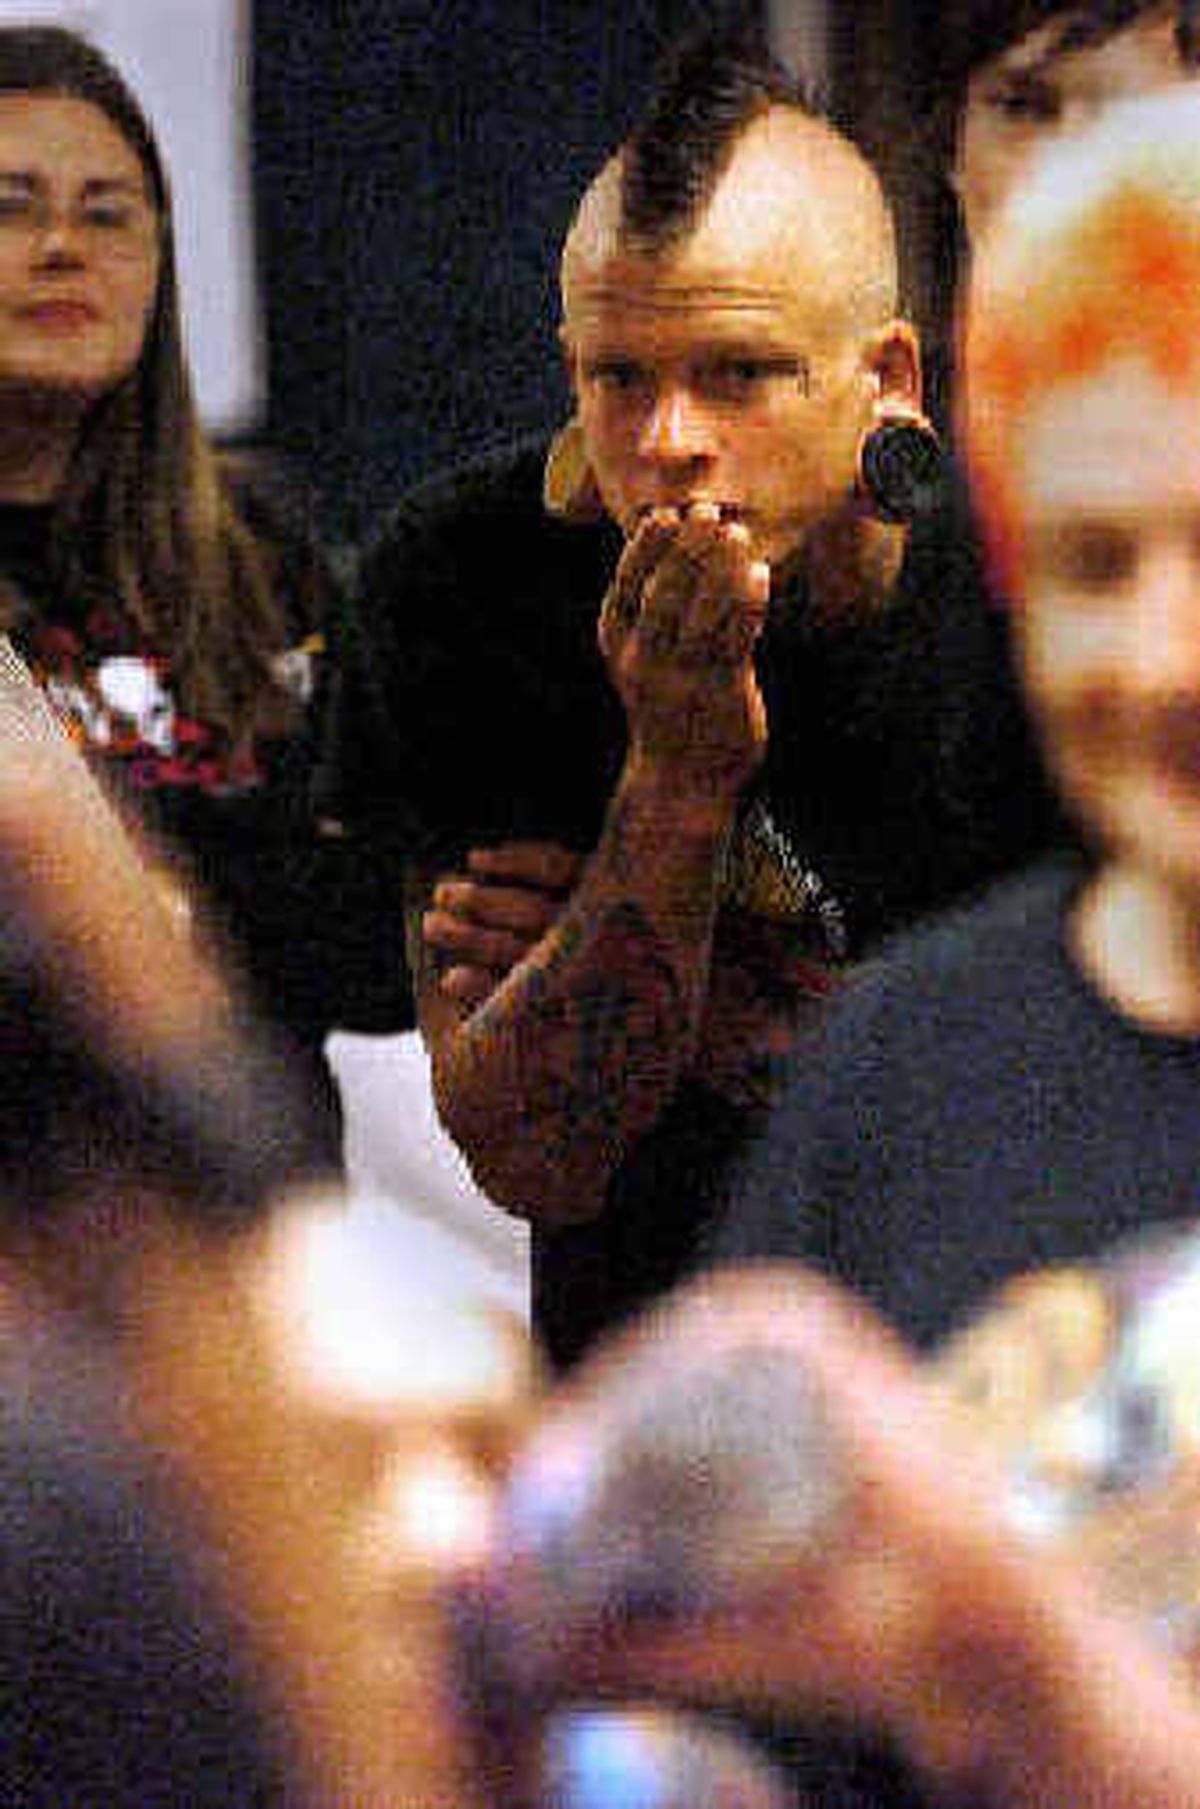 
Mike Wells, 19, of Idaho Falls, watches with apprehension as piercers Fay Hammond and Colleen Weenis apply a "crown of thorns," a piercing consisting of a ring of interlaced needles poked through the scalp of apprentice tattoo artist Jon Slichter, at the Ink Travelers tattoo and body piercing convention Saturday. 
 (Jesse Tinsley / The Spokesman-Review)